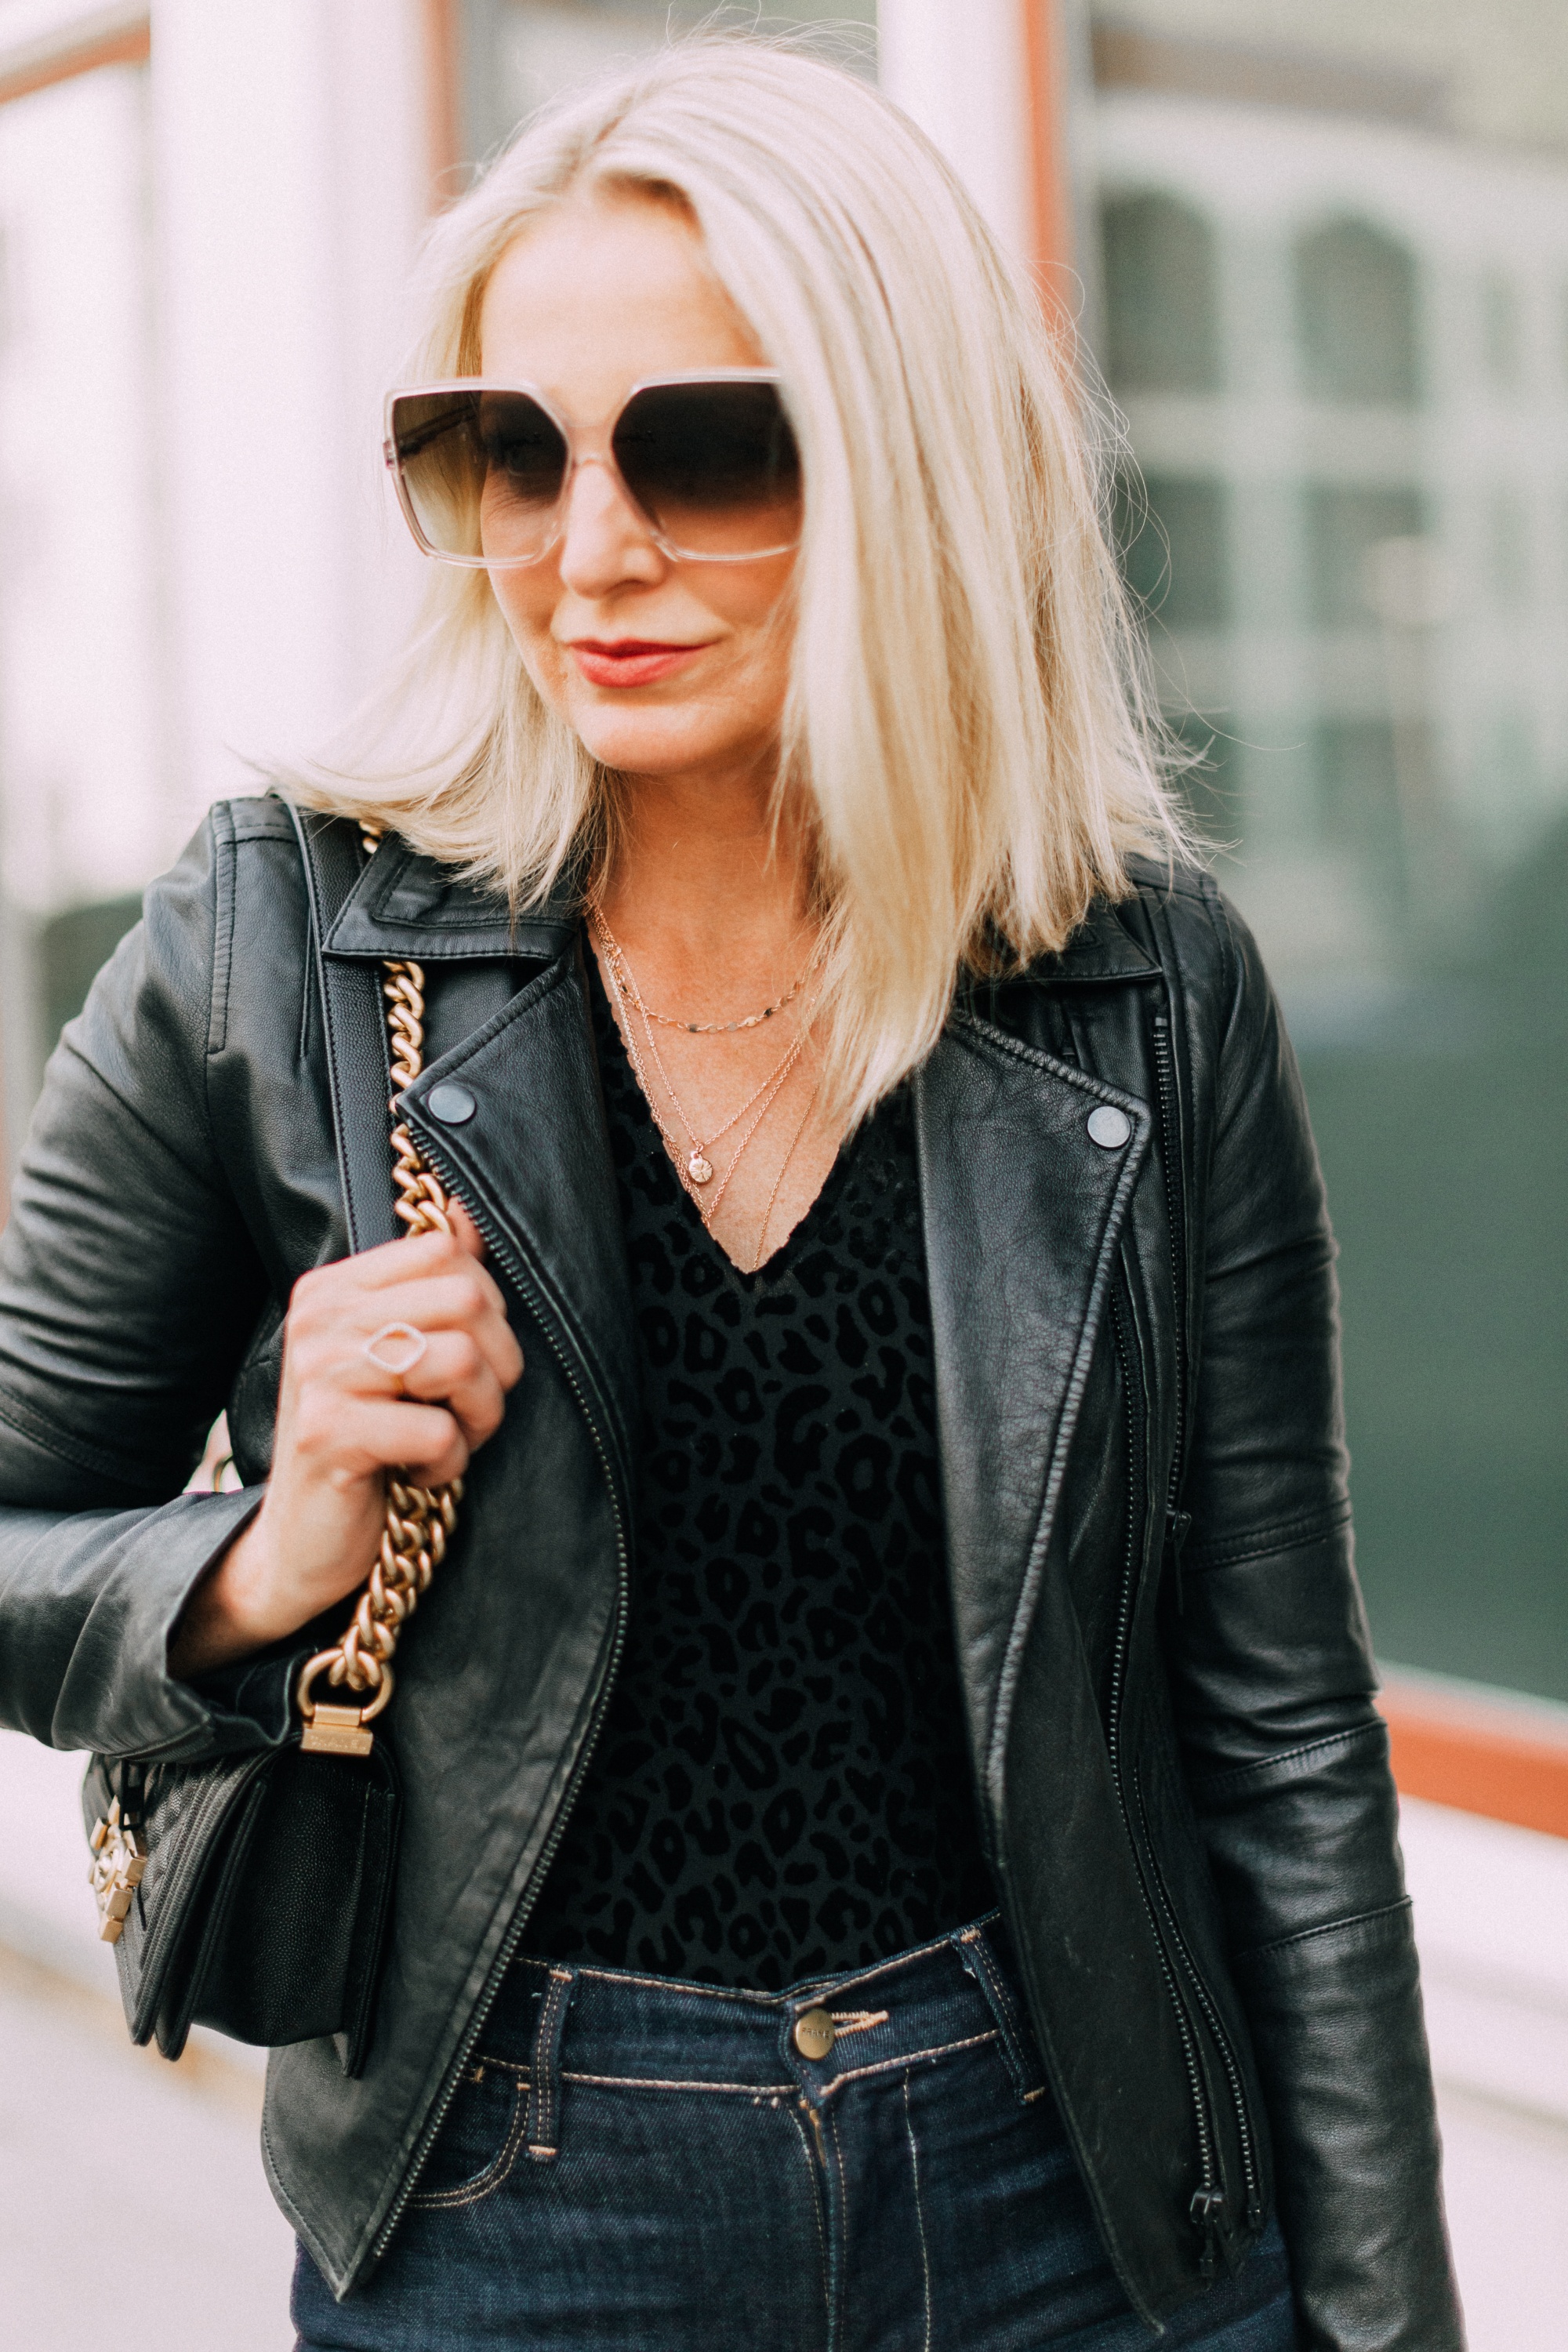 Leather jacket on fashion blogger Erin Busbee of Busbee style in Telluride Colorado